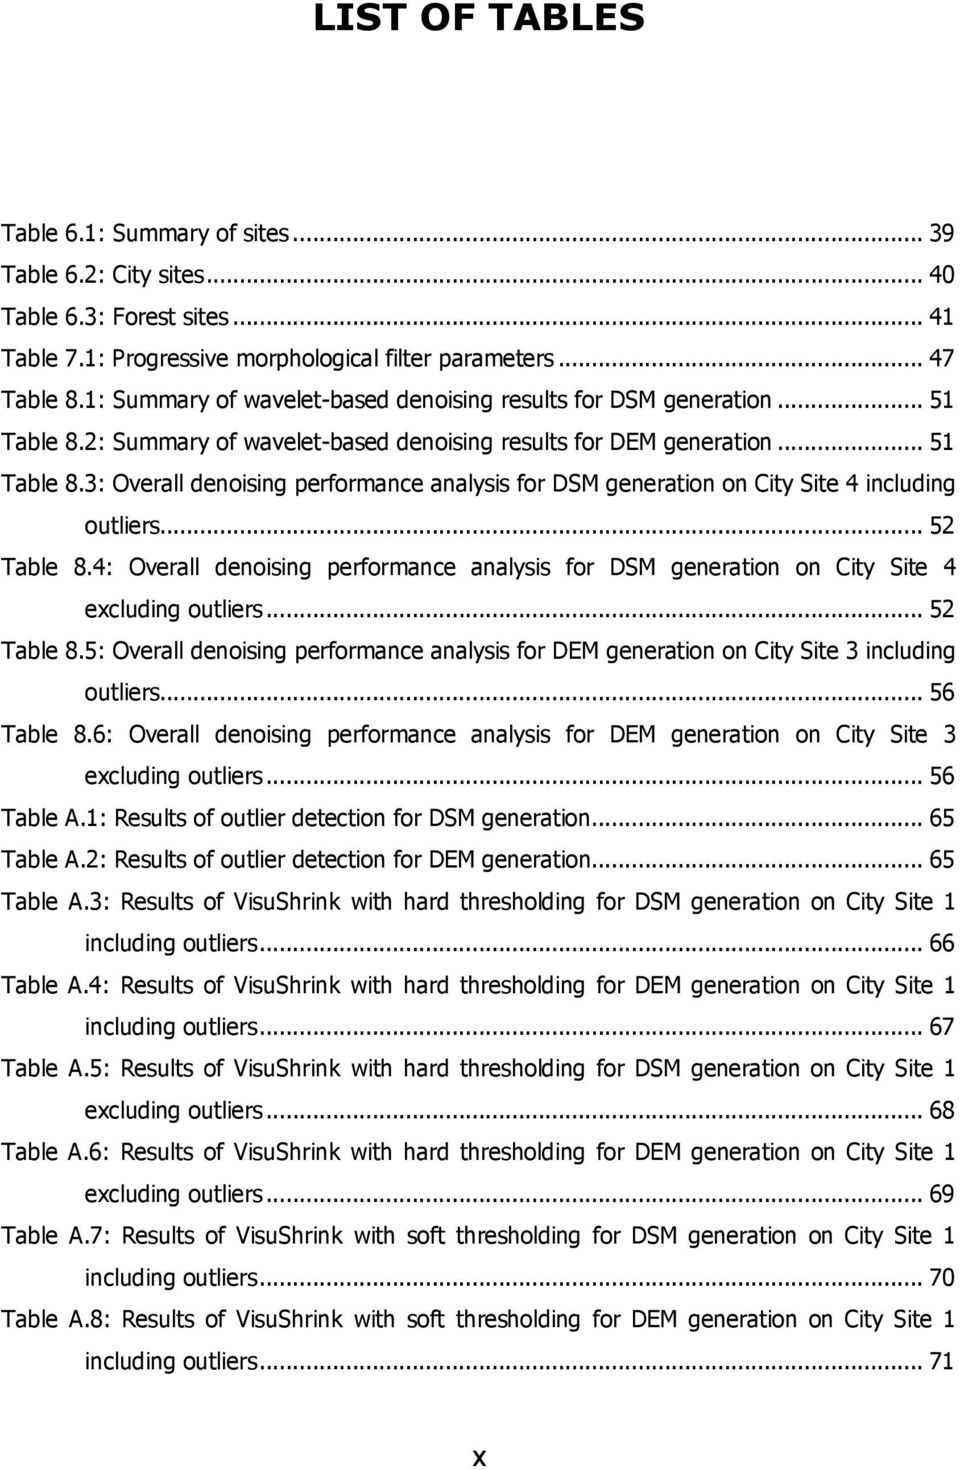 .. 52 Table 8.4: Overall denoising performance analysis for DSM generation on City Site 4 excluding outliers... 52 Table 8.5: Overall denoising performance analysis for DEM generation on City Site 3 including outliers.